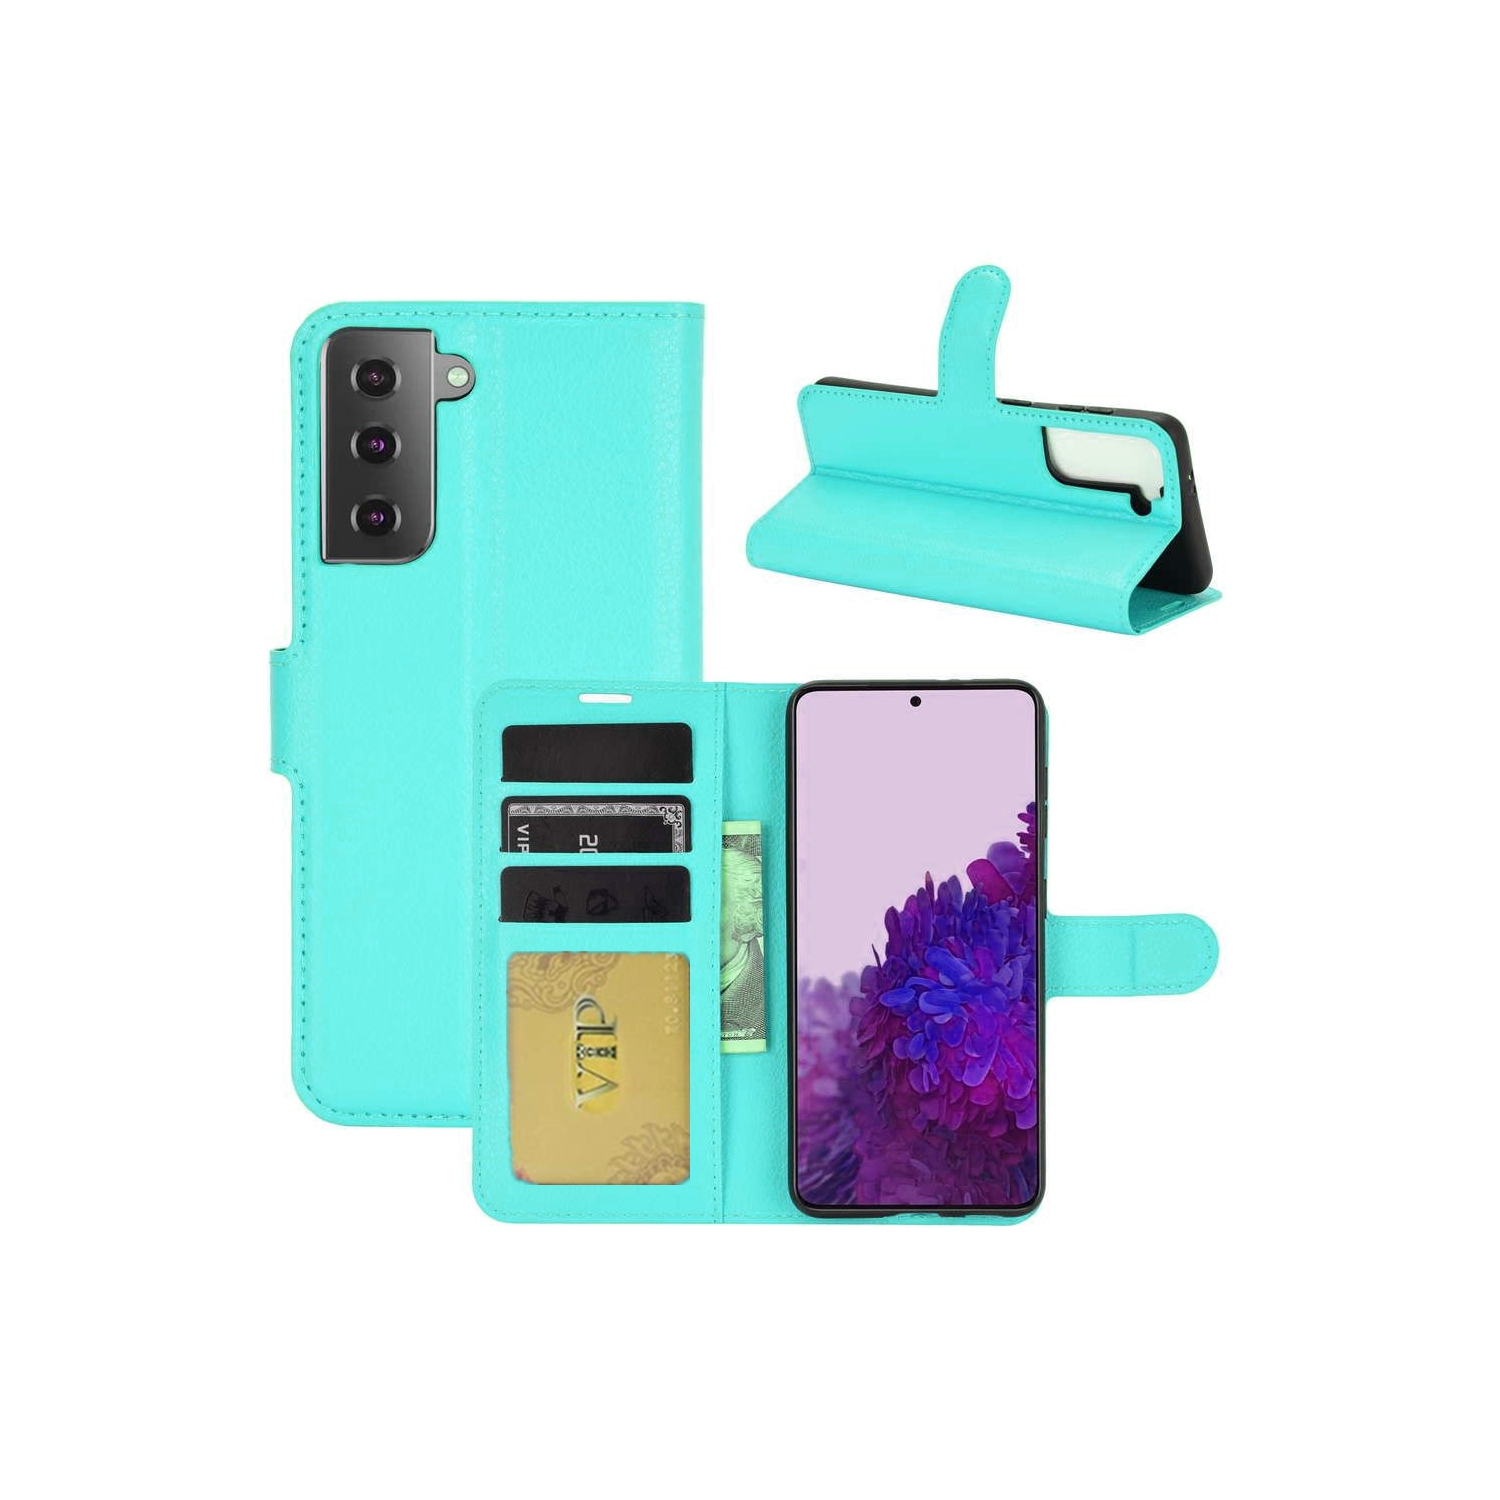 【CSmart】 Magnetic Card Slot Leather Folio Wallet Flip Case Cover for Samsung Galaxy S21 5G 6.2", Mint